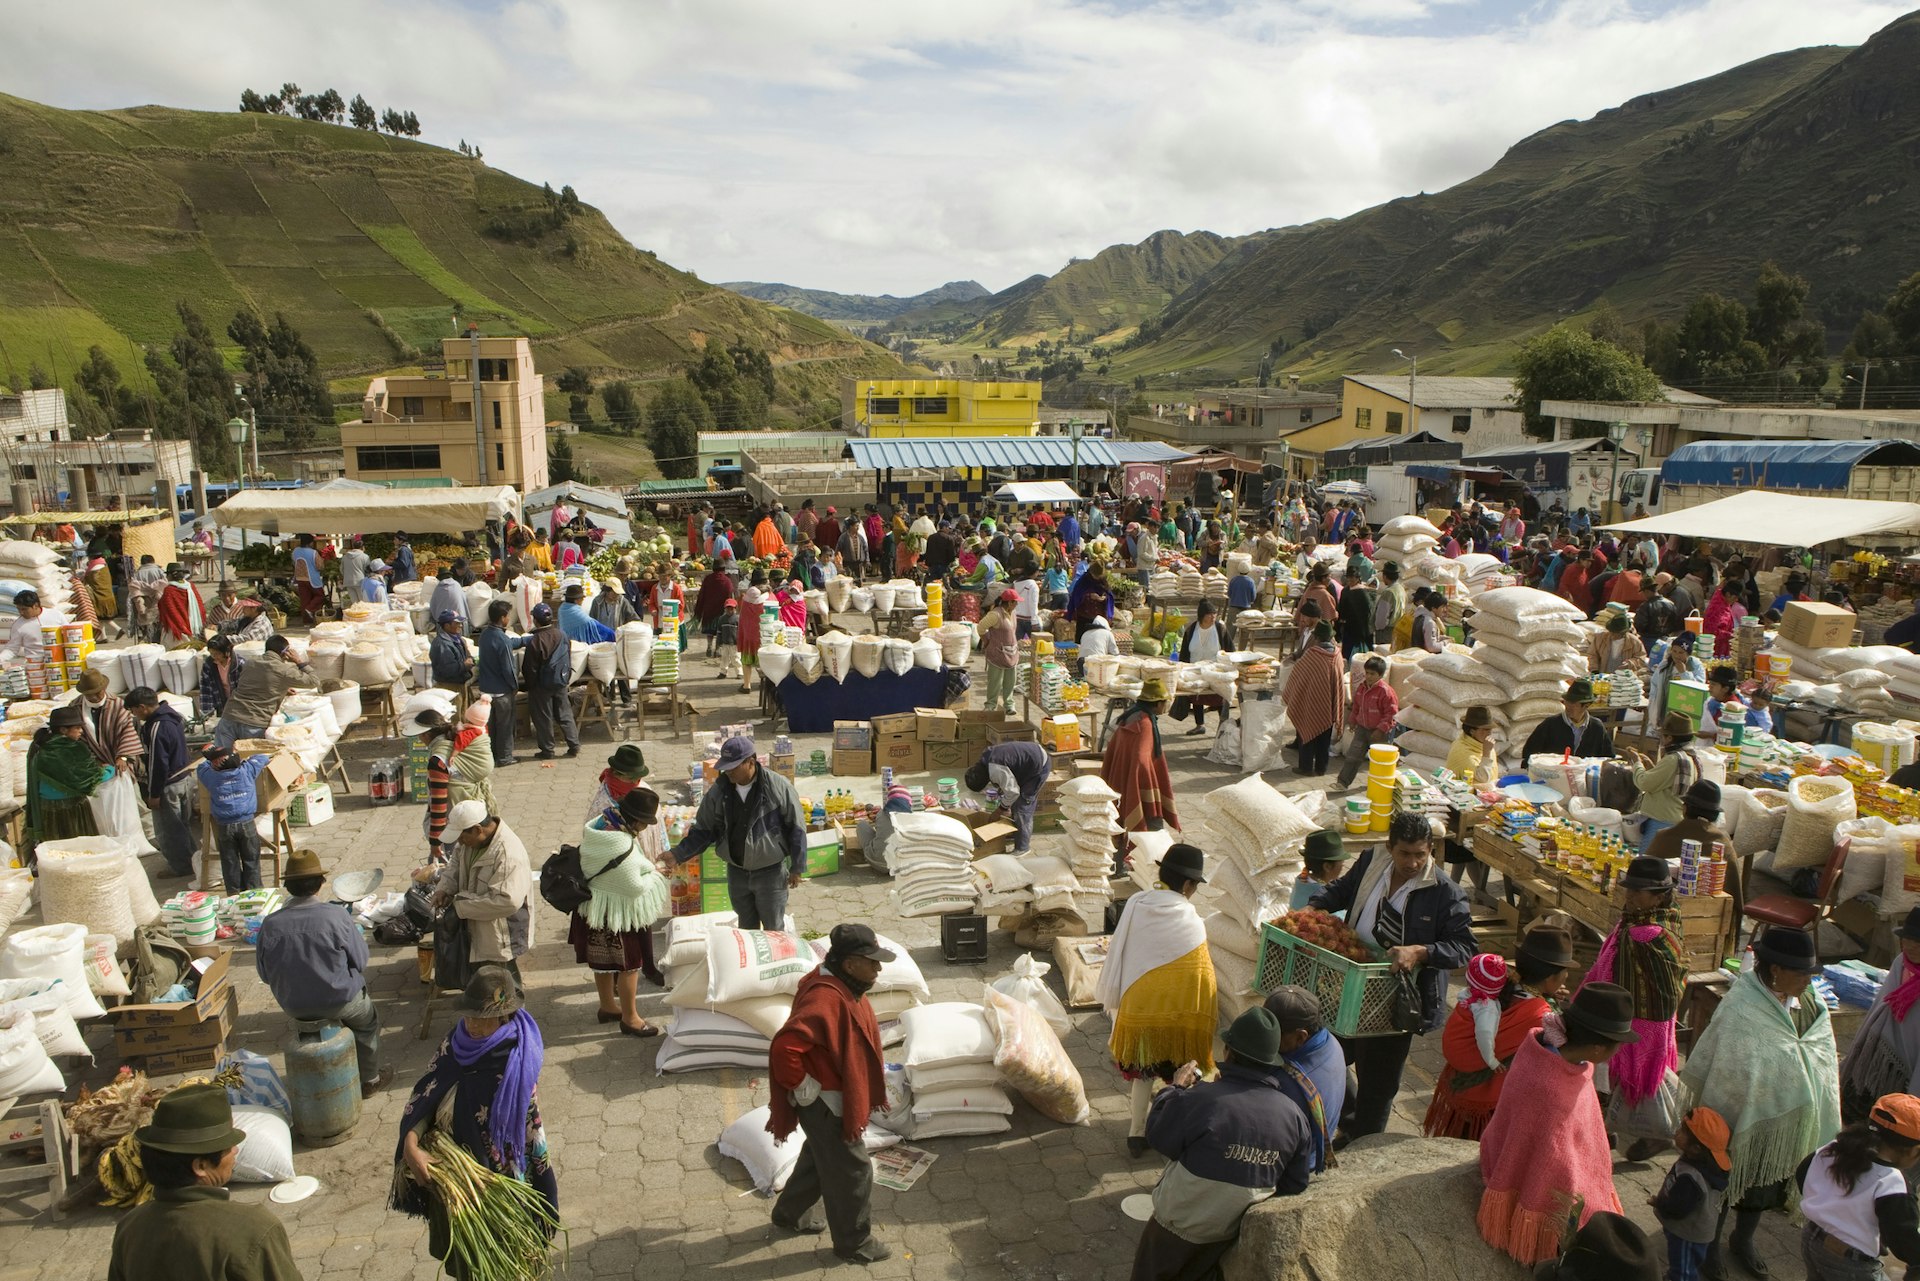 Weekly market at Zambagua, Ecuador, which draws indigenous people from surrounding villages.